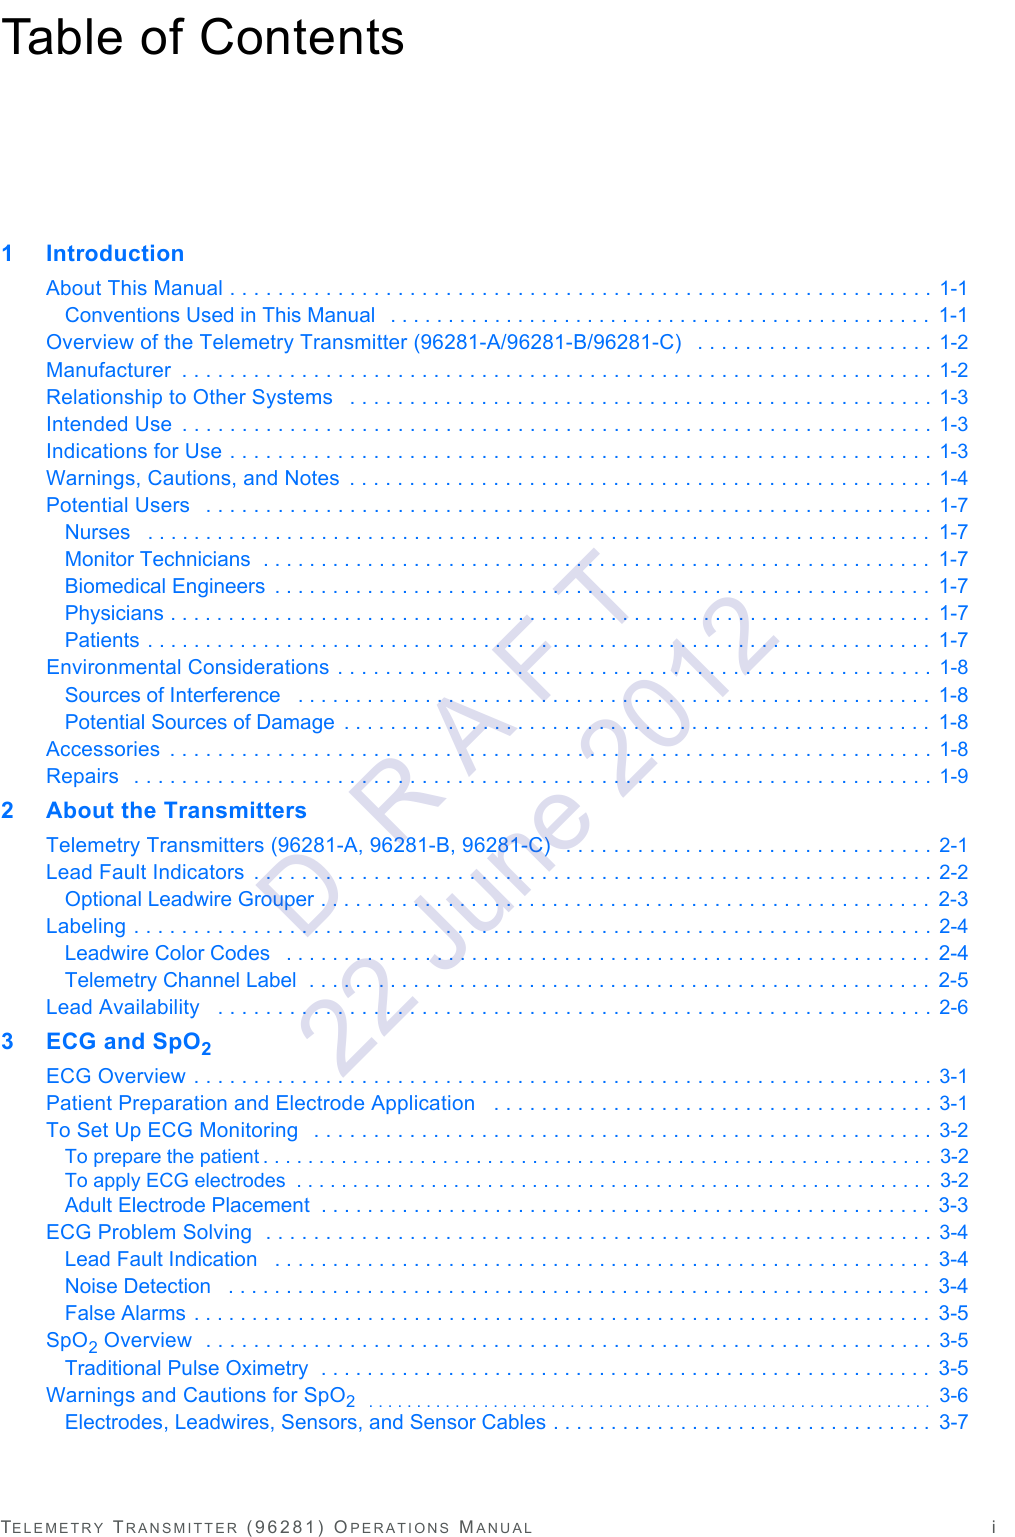 TELEMETRY TRANSMITTER (96281) OPERATIONS MANUAL iTable of Contents1 IntroductionAbout This Manual . . . . . . . . . . . . . . . . . . . . . . . . . . . . . . . . . . . . . . . . . . . . . . . . . . . . . . . . . . . 1-1Conventions Used in This Manual   . . . . . . . . . . . . . . . . . . . . . . . . . . . . . . . . . . . . . . . . . . . . . . .  1-1Overview of the Telemetry Transmitter (96281-A/96281-B/96281-C)   . . . . . . . . . . . . . . . . . . . . 1-2Manufacturer  . . . . . . . . . . . . . . . . . . . . . . . . . . . . . . . . . . . . . . . . . . . . . . . . . . . . . . . . . . . . . . . 1-2Relationship to Other Systems   . . . . . . . . . . . . . . . . . . . . . . . . . . . . . . . . . . . . . . . . . . . . . . . . . 1-3Intended Use  . . . . . . . . . . . . . . . . . . . . . . . . . . . . . . . . . . . . . . . . . . . . . . . . . . . . . . . . . . . . . . . 1-3Indications for Use . . . . . . . . . . . . . . . . . . . . . . . . . . . . . . . . . . . . . . . . . . . . . . . . . . . . . . . . . . . 1-3Warnings, Cautions, and Notes  . . . . . . . . . . . . . . . . . . . . . . . . . . . . . . . . . . . . . . . . . . . . . . . . . 1-4Potential Users   . . . . . . . . . . . . . . . . . . . . . . . . . . . . . . . . . . . . . . . . . . . . . . . . . . . . . . . . . . . . . 1-7Nurses   . . . . . . . . . . . . . . . . . . . . . . . . . . . . . . . . . . . . . . . . . . . . . . . . . . . . . . . . . . . . . . . . . . . .  1-7Monitor Technicians  . . . . . . . . . . . . . . . . . . . . . . . . . . . . . . . . . . . . . . . . . . . . . . . . . . . . . . . . . .  1-7Biomedical Engineers  . . . . . . . . . . . . . . . . . . . . . . . . . . . . . . . . . . . . . . . . . . . . . . . . . . . . . . . . .  1-7Physicians . . . . . . . . . . . . . . . . . . . . . . . . . . . . . . . . . . . . . . . . . . . . . . . . . . . . . . . . . . . . . . . . . .  1-7Patients . . . . . . . . . . . . . . . . . . . . . . . . . . . . . . . . . . . . . . . . . . . . . . . . . . . . . . . . . . . . . . . . . . . .  1-7Environmental Considerations . . . . . . . . . . . . . . . . . . . . . . . . . . . . . . . . . . . . . . . . . . . . . . . . . . 1-8Sources of Interference   . . . . . . . . . . . . . . . . . . . . . . . . . . . . . . . . . . . . . . . . . . . . . . . . . . . . . . .  1-8Potential Sources of Damage  . . . . . . . . . . . . . . . . . . . . . . . . . . . . . . . . . . . . . . . . . . . . . . . . . . .  1-8Accessories  . . . . . . . . . . . . . . . . . . . . . . . . . . . . . . . . . . . . . . . . . . . . . . . . . . . . . . . . . . . . . . . . 1-8Repairs  . . . . . . . . . . . . . . . . . . . . . . . . . . . . . . . . . . . . . . . . . . . . . . . . . . . . . . . . . . . . . . . . . . . 1-92 About the TransmittersTelemetry Transmitters (96281-A, 96281-B, 96281-C)   . . . . . . . . . . . . . . . . . . . . . . . . . . . . . . . 2-1Lead Fault Indicators  . . . . . . . . . . . . . . . . . . . . . . . . . . . . . . . . . . . . . . . . . . . . . . . . . . . . . . . . . 2-2Optional Leadwire Grouper . . . . . . . . . . . . . . . . . . . . . . . . . . . . . . . . . . . . . . . . . . . . . . . . . . . . .  2-3Labeling . . . . . . . . . . . . . . . . . . . . . . . . . . . . . . . . . . . . . . . . . . . . . . . . . . . . . . . . . . . . . . . . . . . 2-4Leadwire Color Codes   . . . . . . . . . . . . . . . . . . . . . . . . . . . . . . . . . . . . . . . . . . . . . . . . . . . . . . . .  2-4Telemetry Channel Label  . . . . . . . . . . . . . . . . . . . . . . . . . . . . . . . . . . . . . . . . . . . . . . . . . . . . . .  2-5Lead Availability   . . . . . . . . . . . . . . . . . . . . . . . . . . . . . . . . . . . . . . . . . . . . . . . . . . . . . . . . . . . . 2-63ECG and SpO2ECG Overview . . . . . . . . . . . . . . . . . . . . . . . . . . . . . . . . . . . . . . . . . . . . . . . . . . . . . . . . . . . . . . 3-1Patient Preparation and Electrode Application   . . . . . . . . . . . . . . . . . . . . . . . . . . . . . . . . . . . . . 3-1To Set Up ECG Monitoring   . . . . . . . . . . . . . . . . . . . . . . . . . . . . . . . . . . . . . . . . . . . . . . . . . . . . 3-2To prepare the patient . . . . . . . . . . . . . . . . . . . . . . . . . . . . . . . . . . . . . . . . . . . . . . . . . . . . . . . . . . . .  3-2To apply ECG electrodes  . . . . . . . . . . . . . . . . . . . . . . . . . . . . . . . . . . . . . . . . . . . . . . . . . . . . . . . . .  3-2Adult Electrode Placement  . . . . . . . . . . . . . . . . . . . . . . . . . . . . . . . . . . . . . . . . . . . . . . . . . . . . .  3-3ECG Problem Solving  . . . . . . . . . . . . . . . . . . . . . . . . . . . . . . . . . . . . . . . . . . . . . . . . . . . . . . . . 3-4Lead Fault Indication   . . . . . . . . . . . . . . . . . . . . . . . . . . . . . . . . . . . . . . . . . . . . . . . . . . . . . . . . .  3-4Noise Detection   . . . . . . . . . . . . . . . . . . . . . . . . . . . . . . . . . . . . . . . . . . . . . . . . . . . . . . . . . . . . .  3-4False Alarms . . . . . . . . . . . . . . . . . . . . . . . . . . . . . . . . . . . . . . . . . . . . . . . . . . . . . . . . . . . . . . . .  3-5SpO2Overview  . . . . . . . . . . . . . . . . . . . . . . . . . . . . . . . . . . . . . . . . . . . . . . . . . . . . . . . . . . . . . 3-5Traditional Pulse Oximetry  . . . . . . . . . . . . . . . . . . . . . . . . . . . . . . . . . . . . . . . . . . . . . . . . . . . . .  3-5Warnings and Cautions for SpO2   . . . . . . . . . . . . . . . . . . . . . . . . . . . . . . . . . . . . . . . . . . . . . . . . . . . . . . . . . . .  3-6Electrodes, Leadwires, Sensors, and Sensor Cables . . . . . . . . . . . . . . . . . . . . . . . . . . . . . . . . .  3-7D  R A F T 22 June 2012